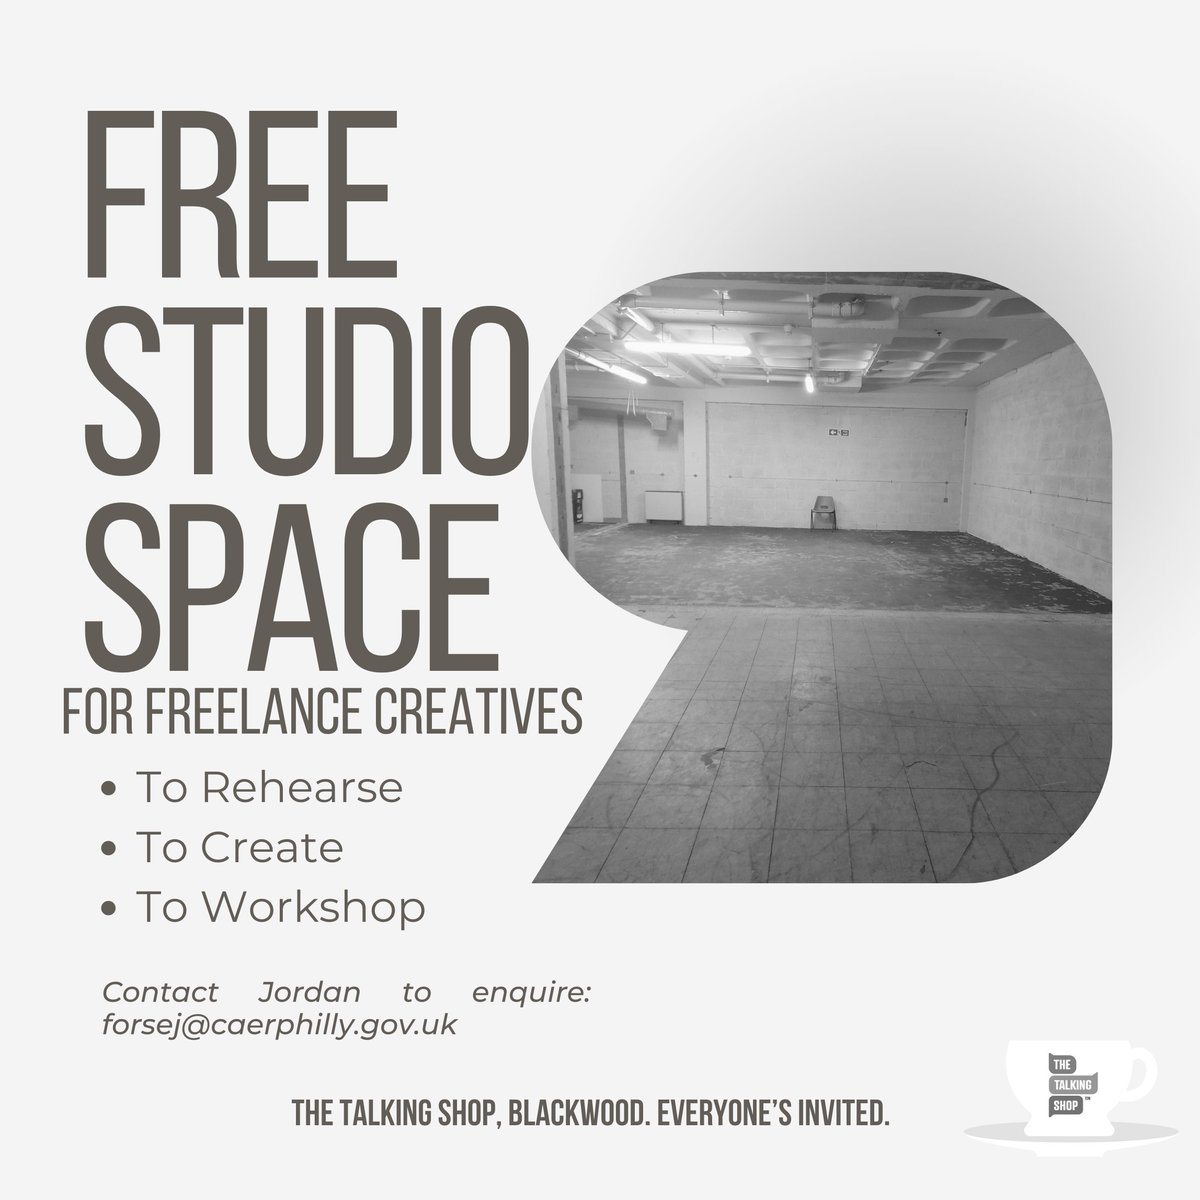 PROFESSIONAL FREELANCE CREATIVES OF CAERPHILLY COUNTY, VALLEYS & BEYOND We've got a studio space at The Talking Shop, Blackwood and we'd love you to use it, for free! Theatre, art, dance, workshops, contact Jordan today to enquire: forsej@caerphilly.gov.uk #EveryonesInvited